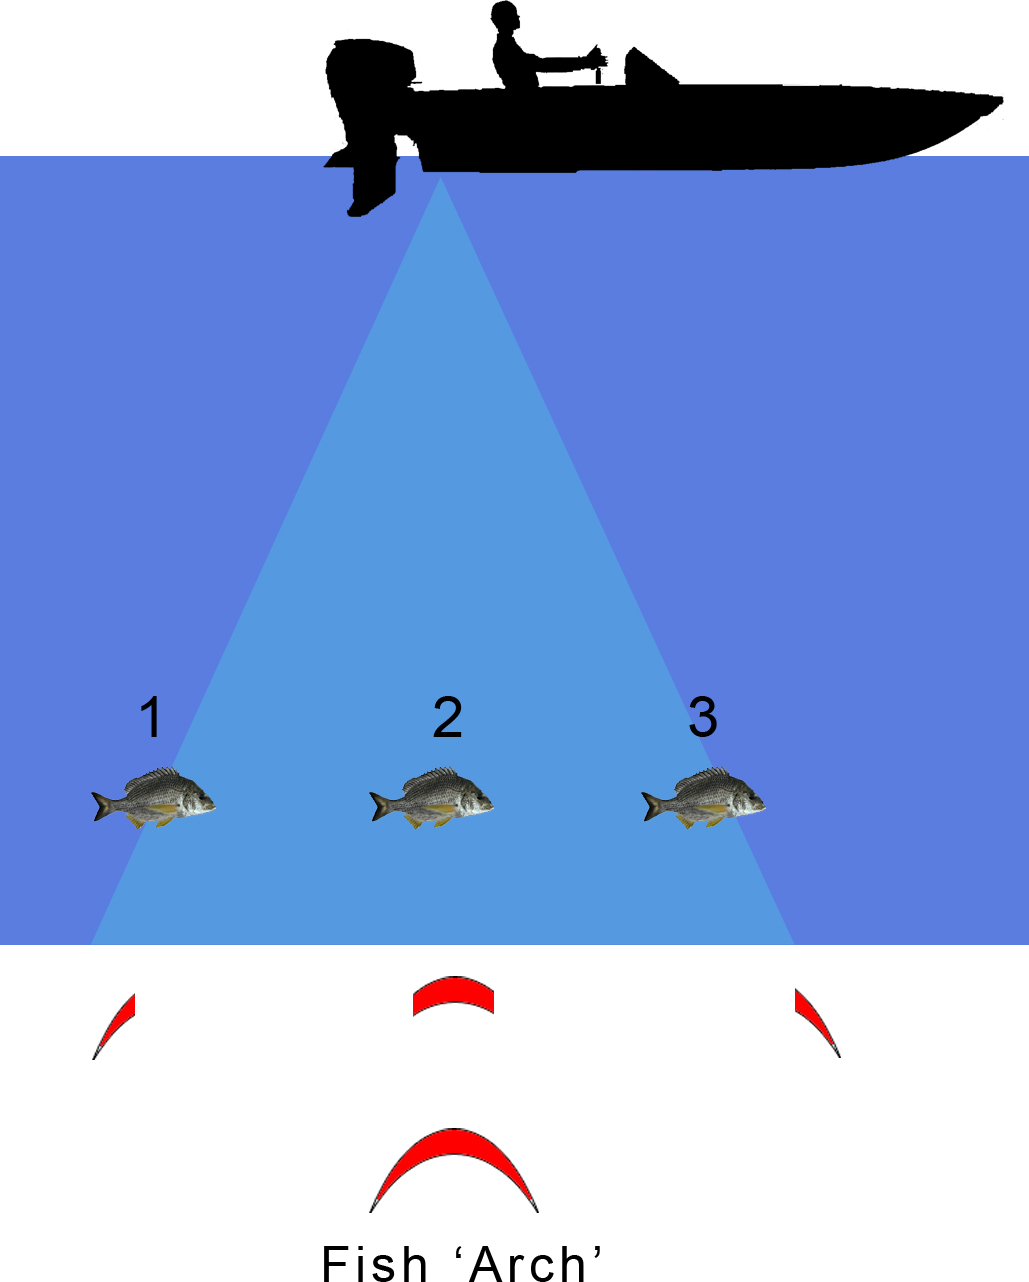 How to identify fish in fishfinder Sonar image? - Equipment-Expert